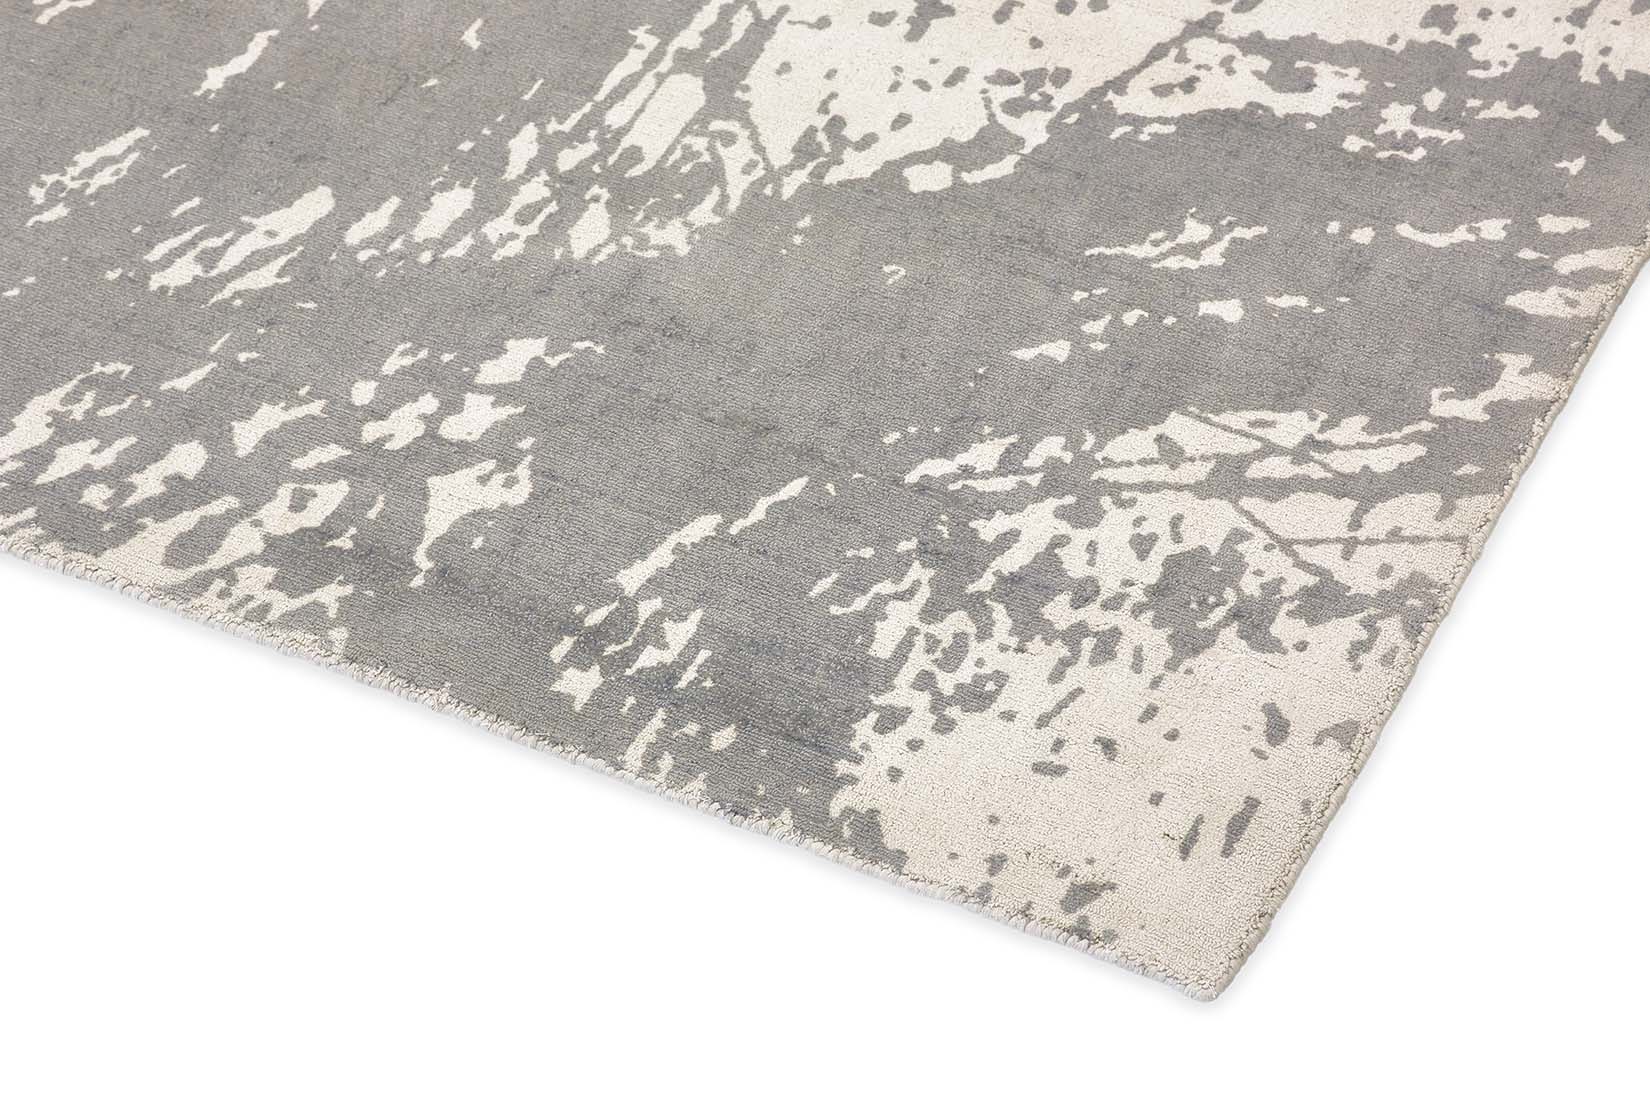 abstract cotton rug in grey and beige
